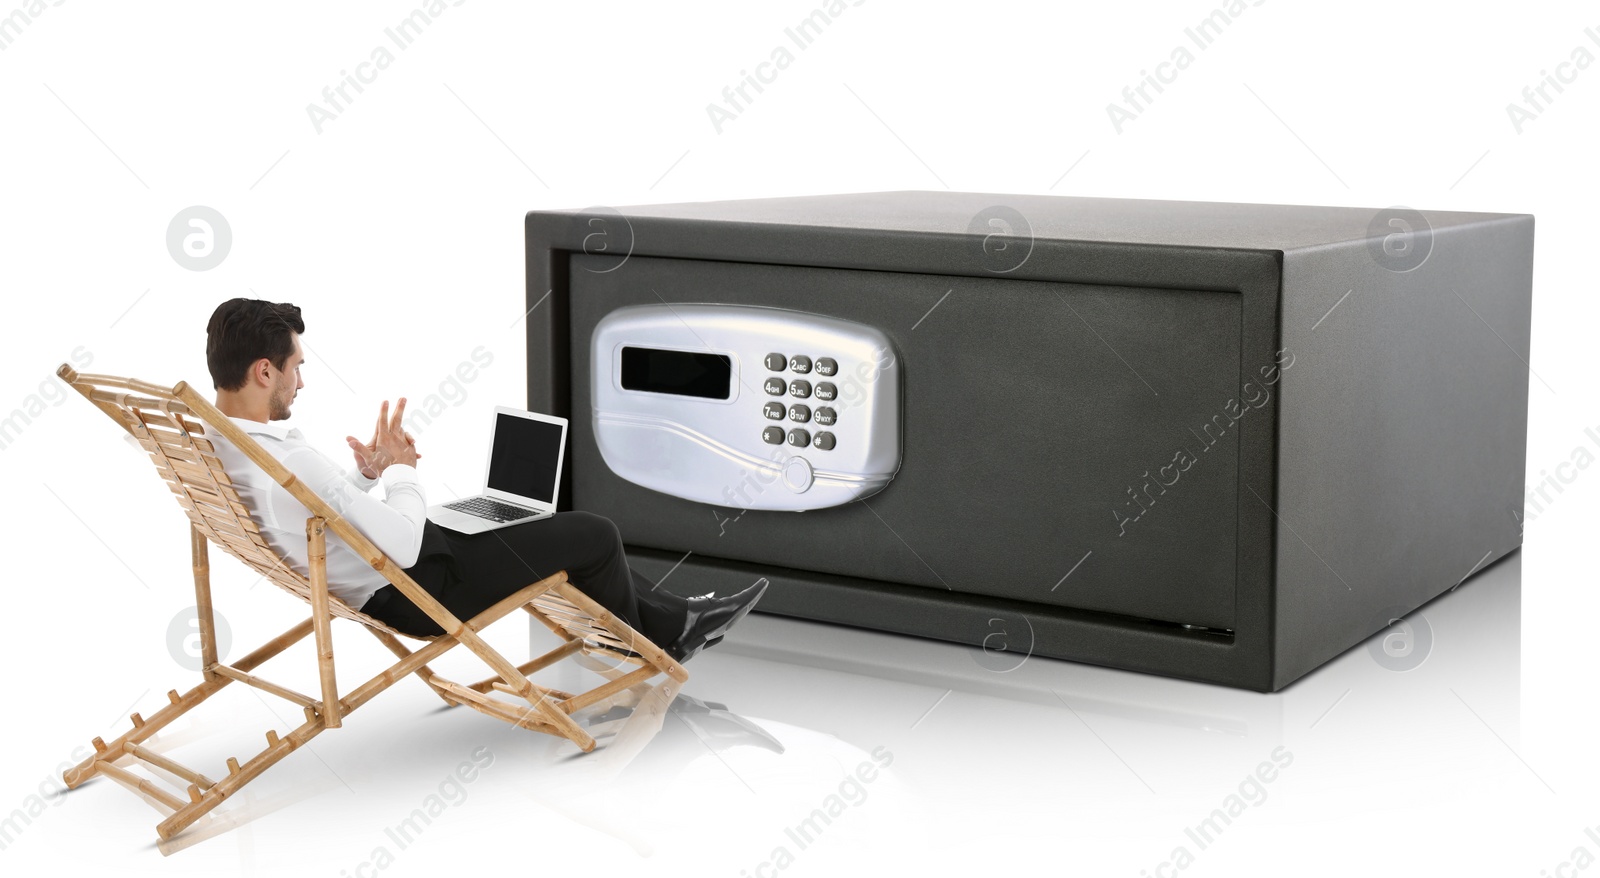 Image of Financial security, keeping money. Thoughtful businessman with laptop in front of big steel safe, white background